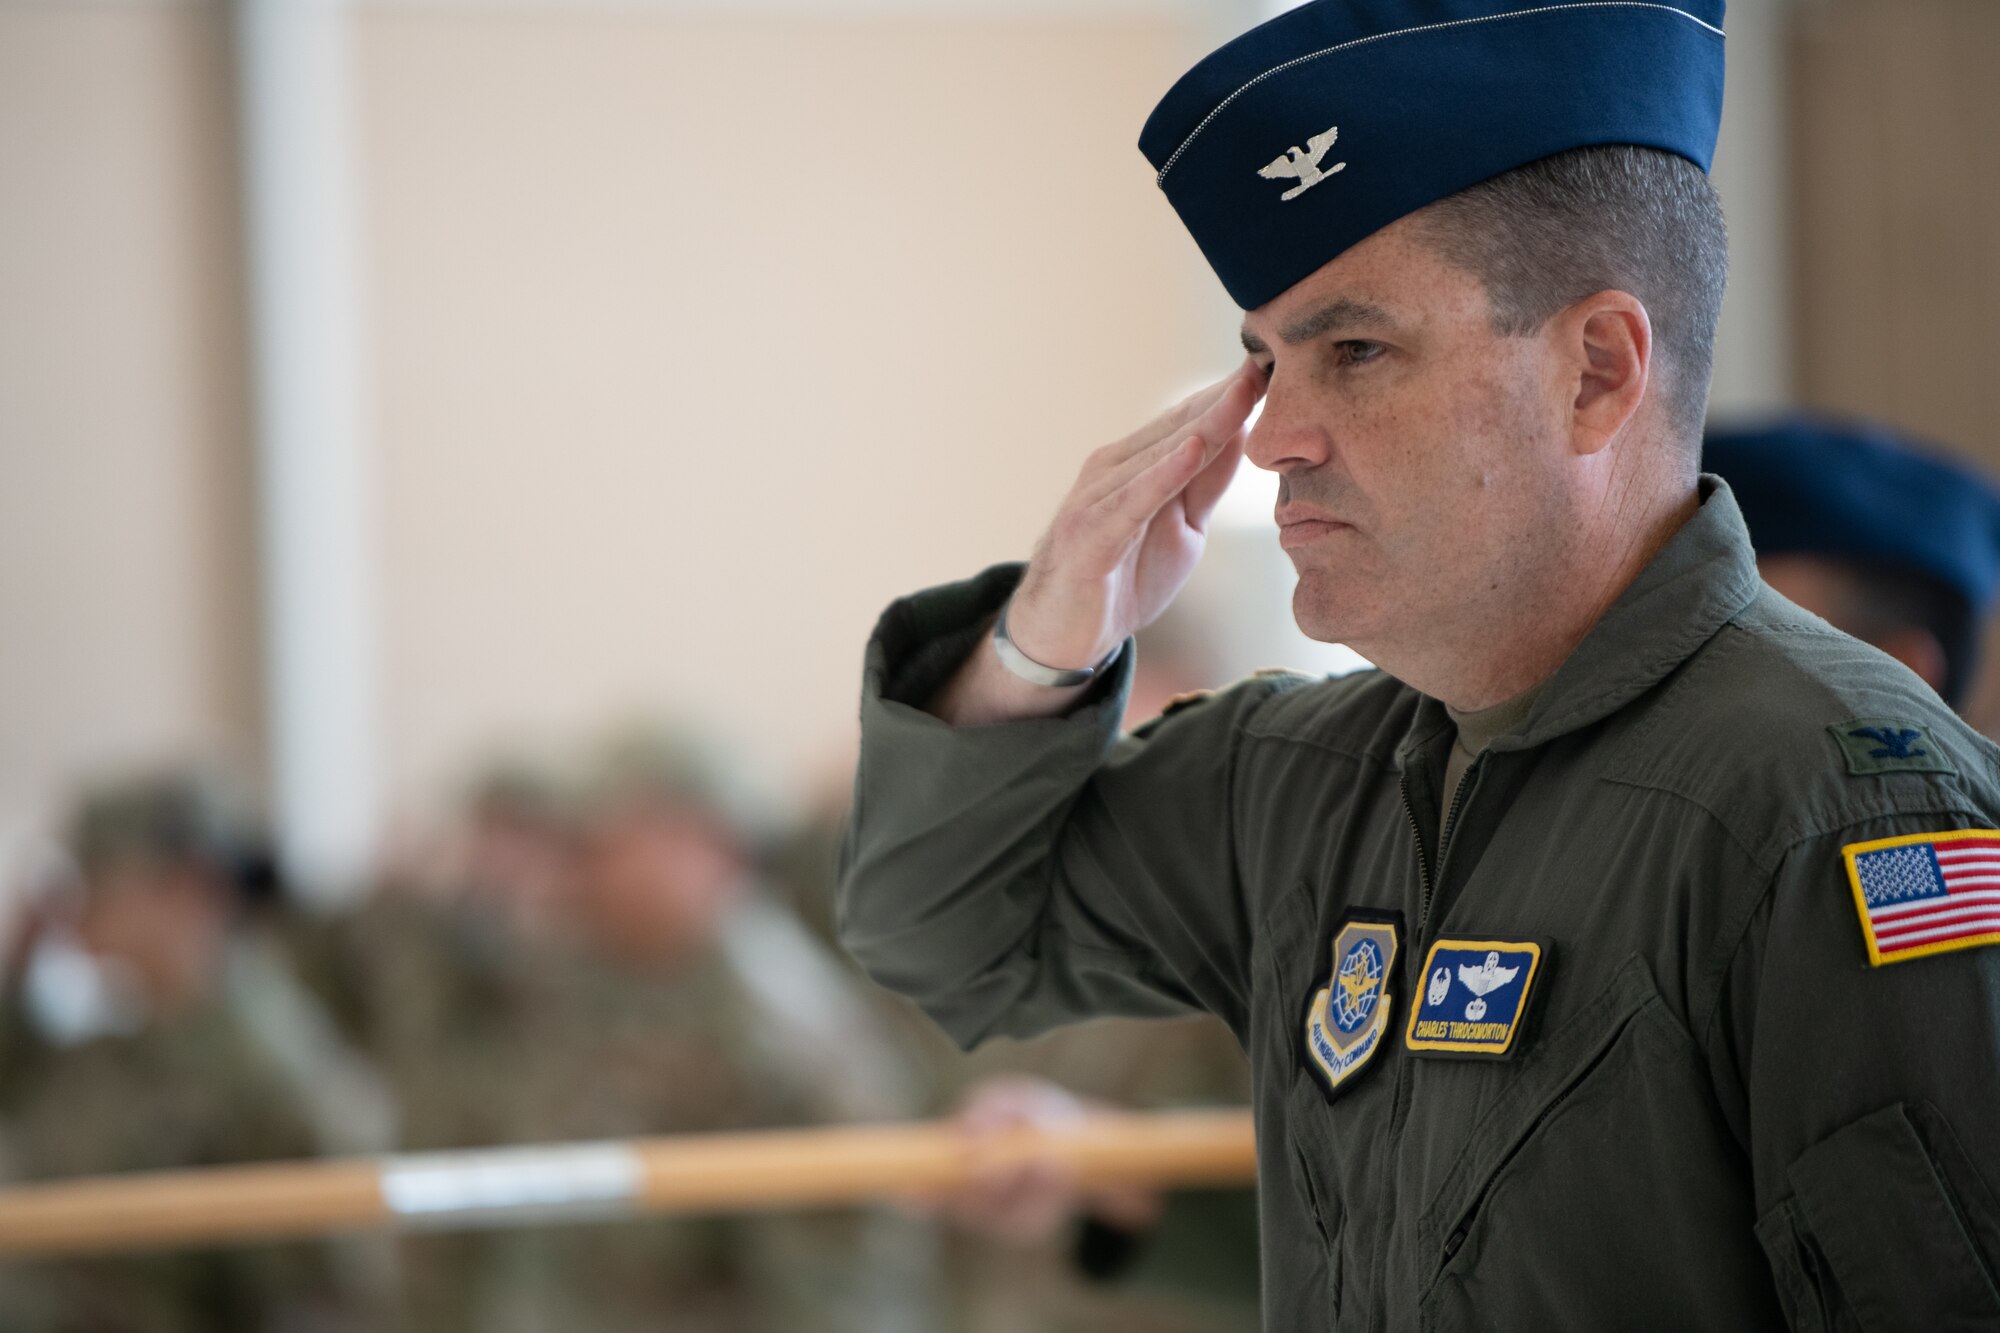 An Airman saluting while in formation.